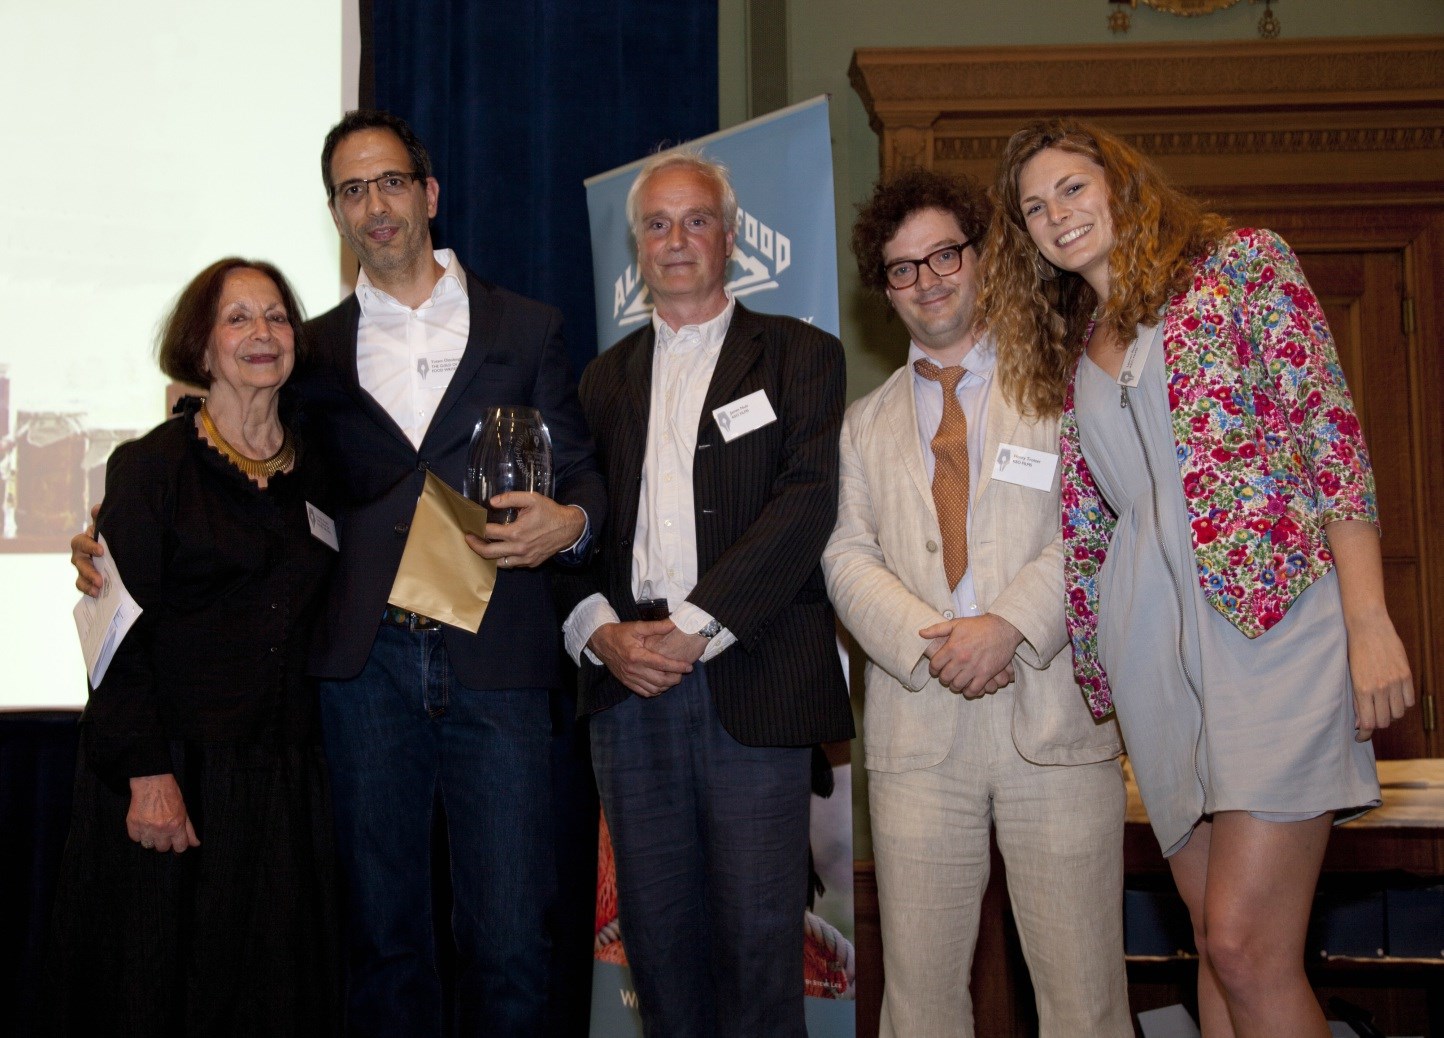 Claudia Roden presenting the Kate Whiteman Award for Work on Food and Travel to from left to right: Yotam Ottolenghi, James Nutt, Henry Trotter and Lauren Rowles from Keo Films